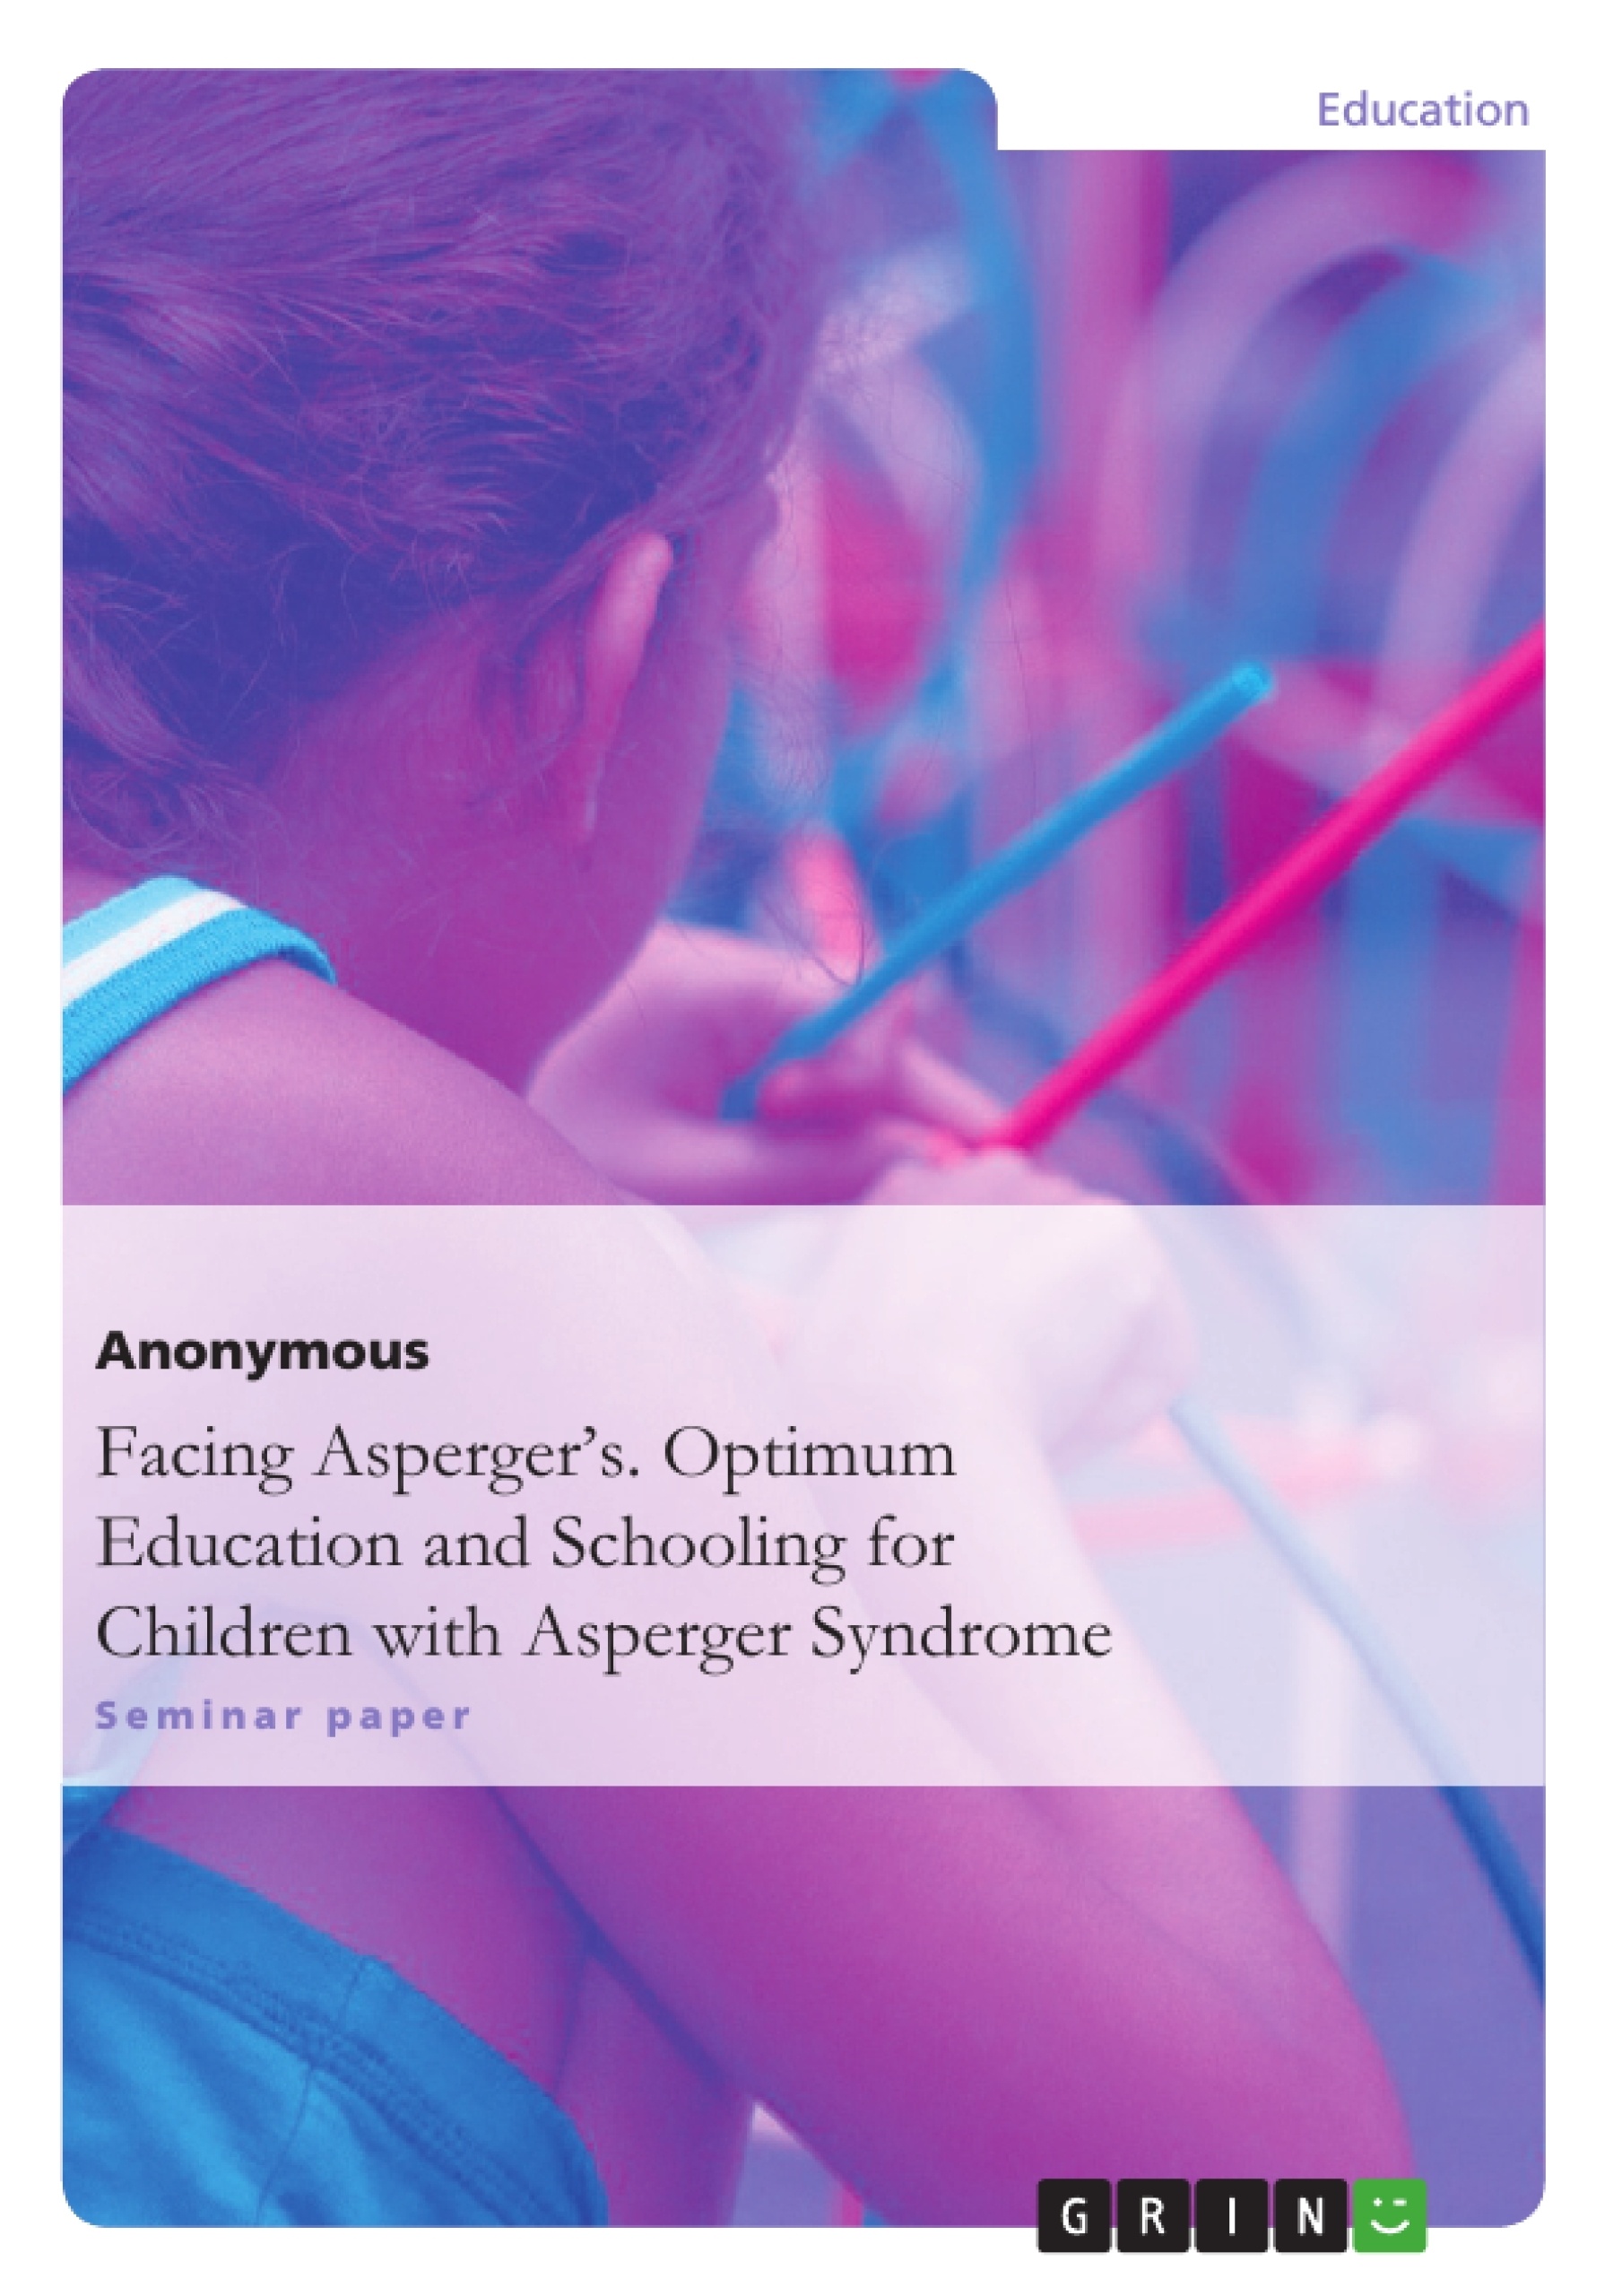 Title: Facing Asperger’s. Optimum Education and Schooling for Children with Asperger Syndrome